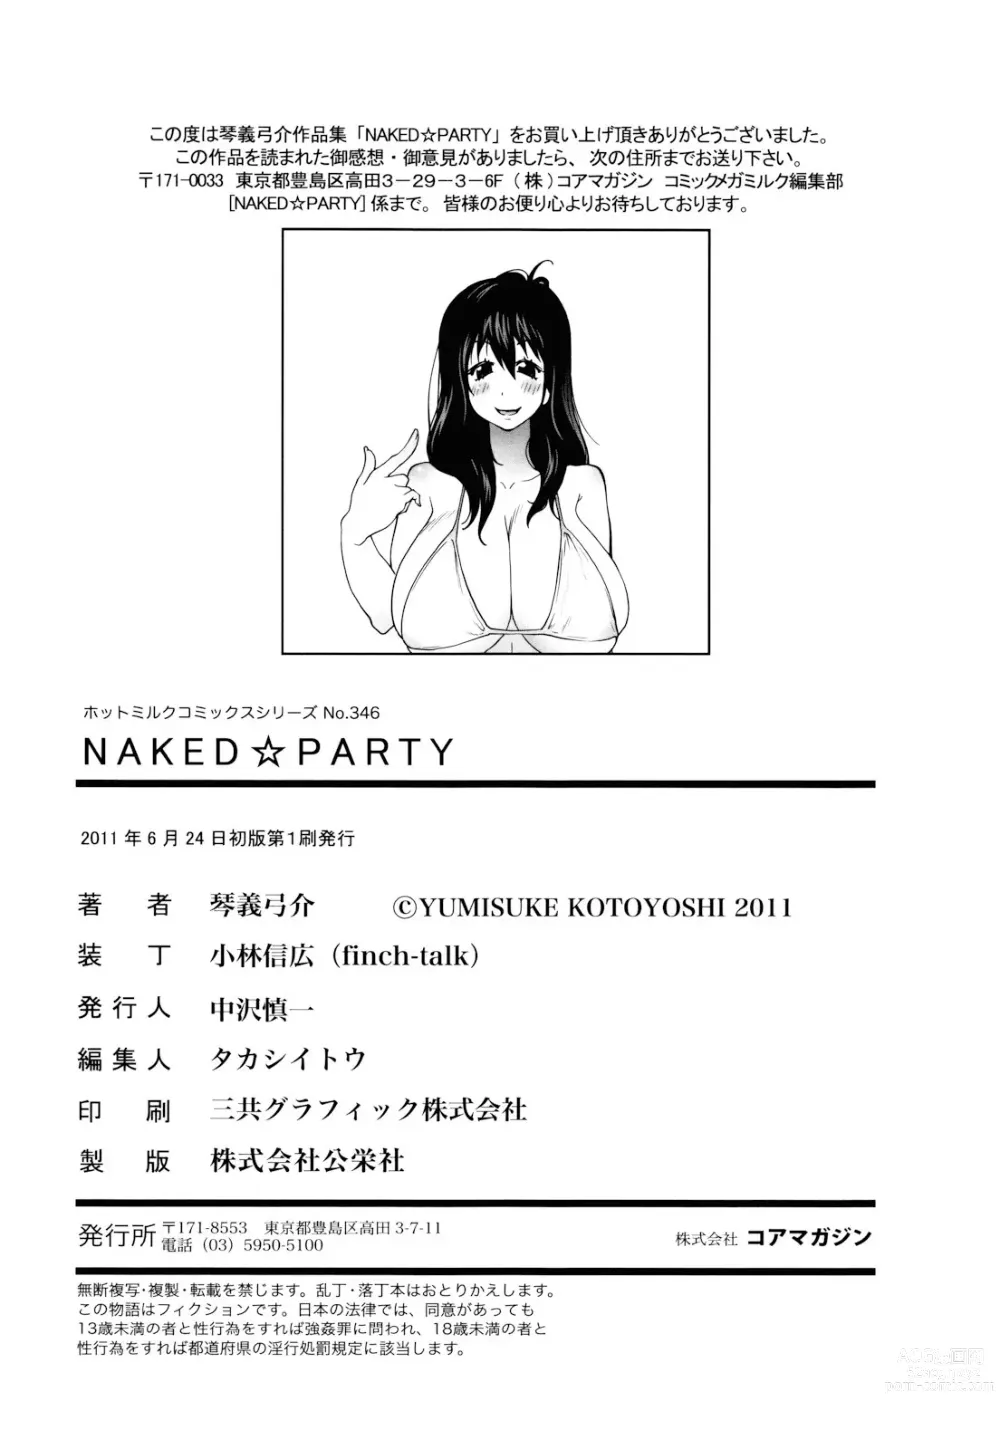 Page 190 of manga NAKED PARTY